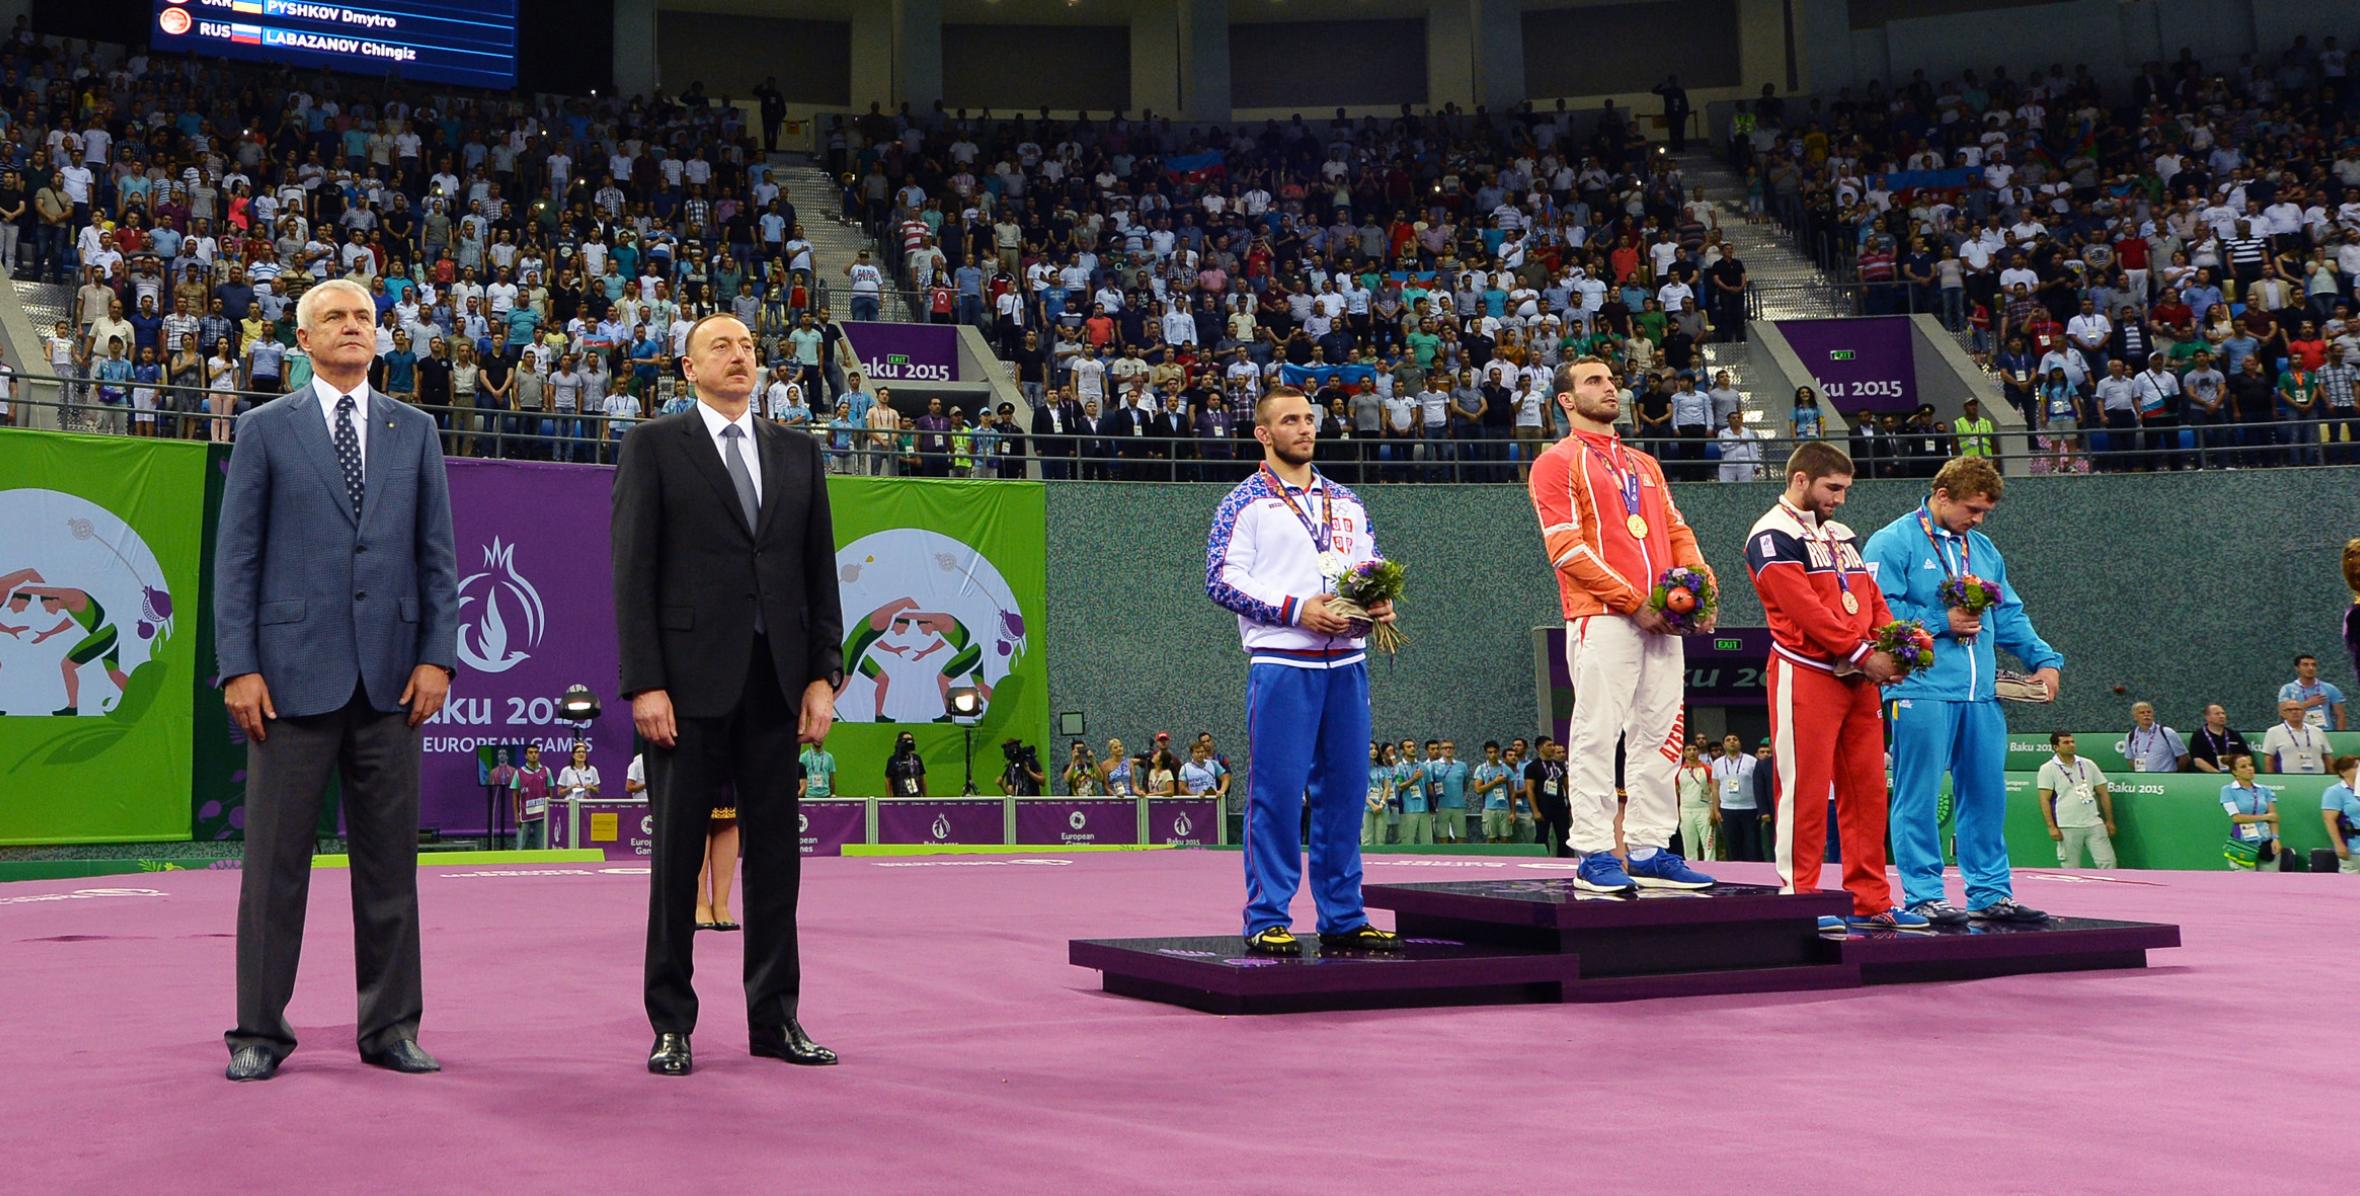 Ilham Aliyev presented medals to the winning Greco-Roman wrestlers